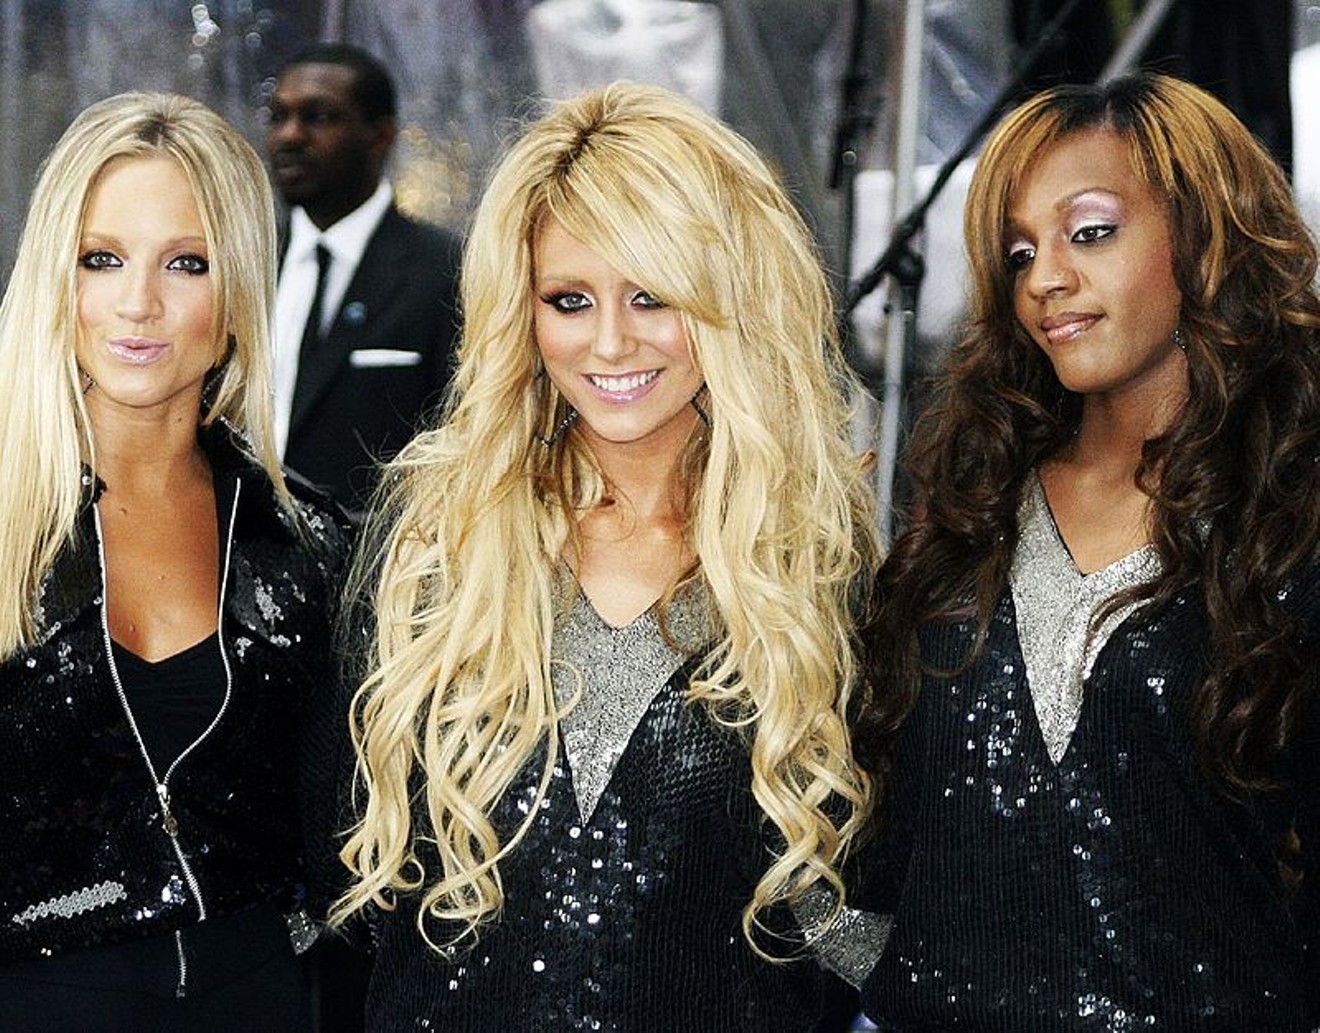 Danity Kane is in town. Remember them?